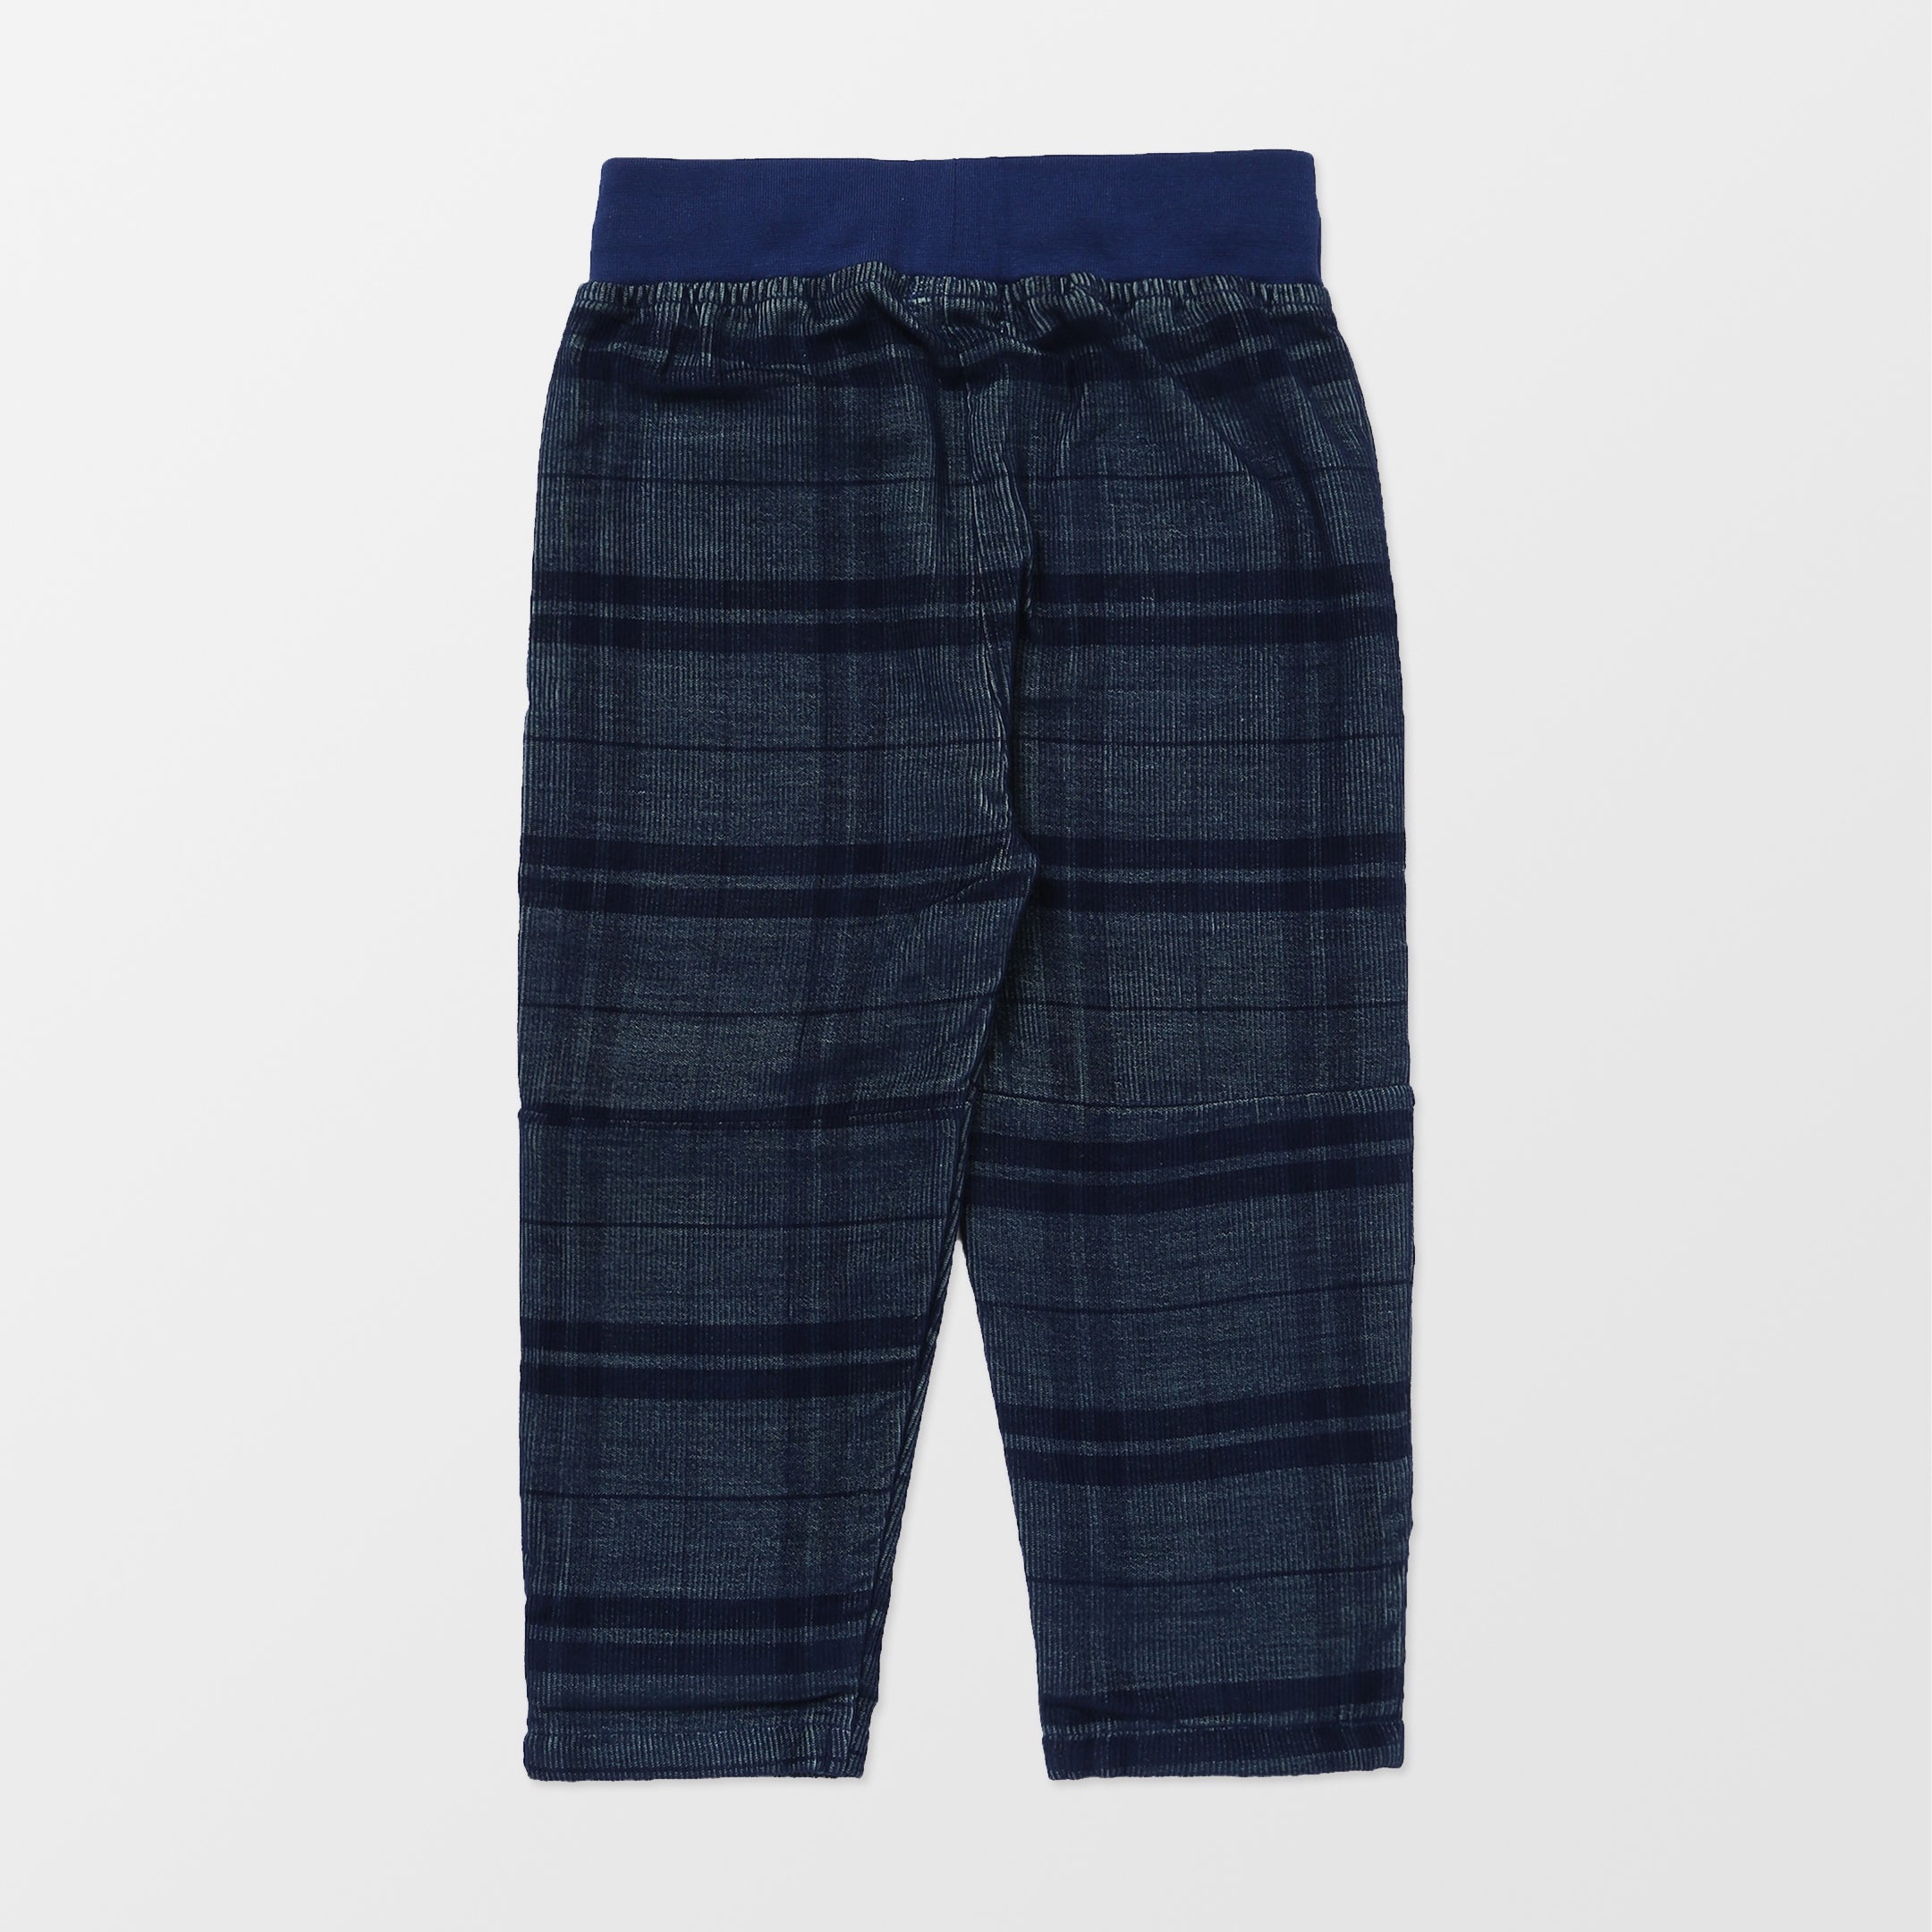 Buy Mid Grey Formal Check Trousers (3-16yrs) from the Next UK online shop